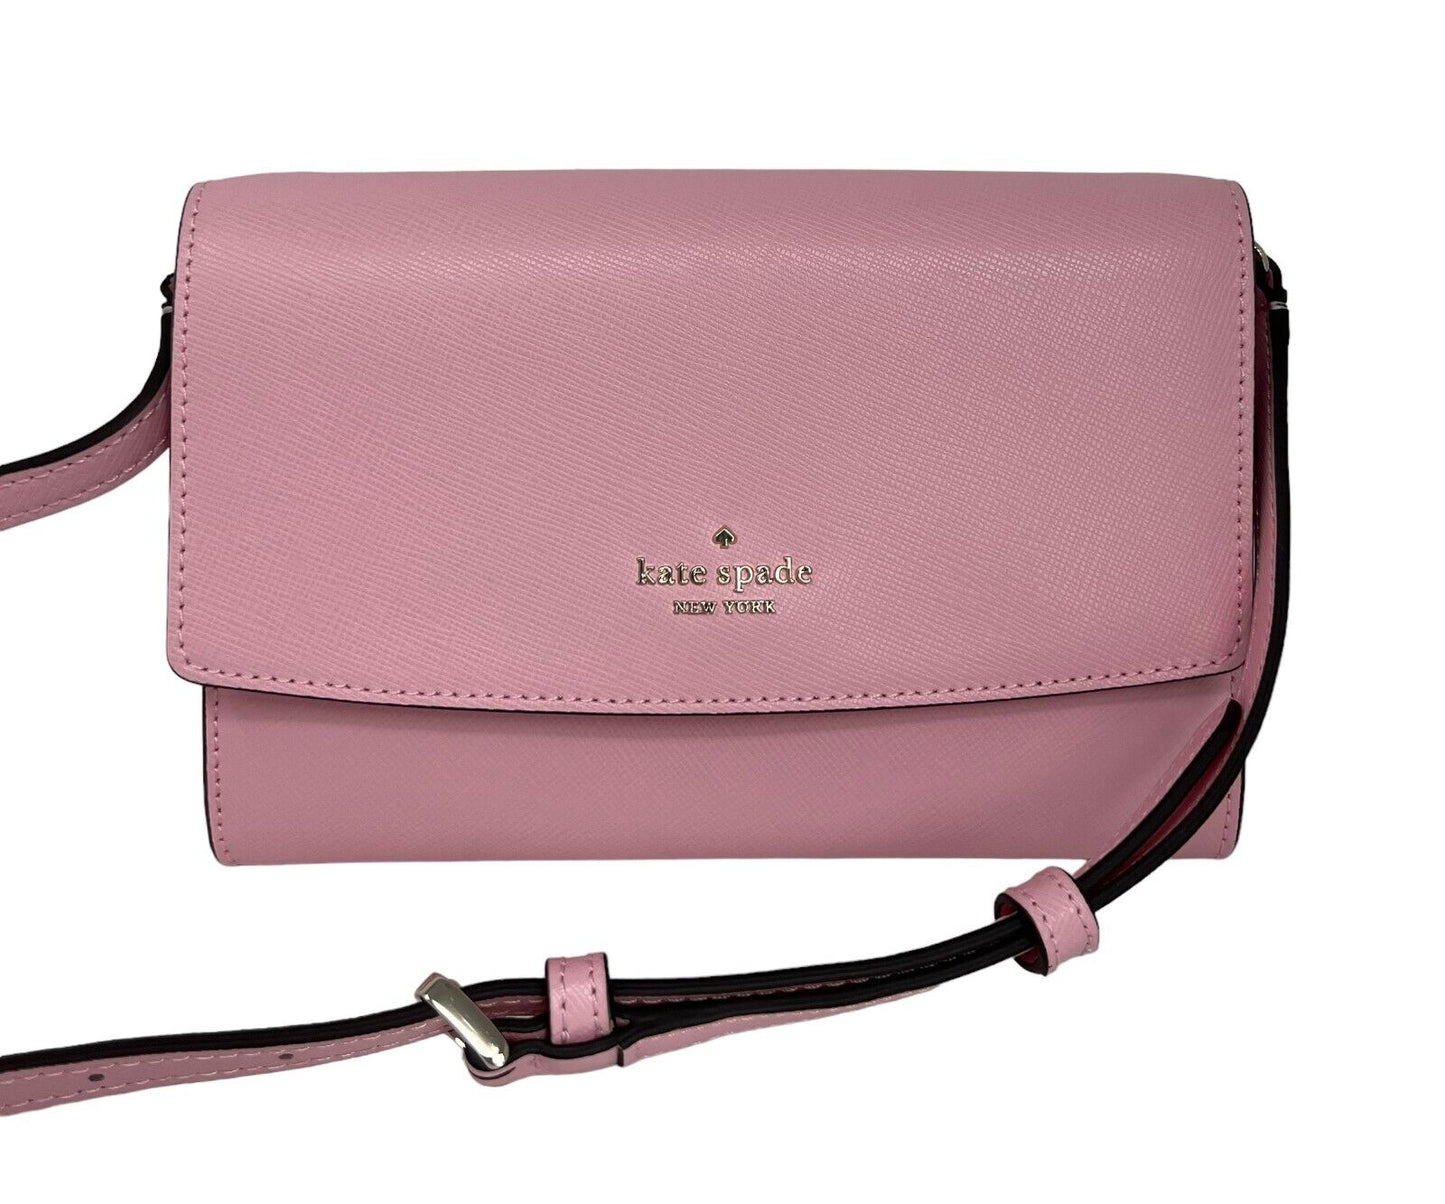 Kate Spade Perry Saffiano Leather Mitten Pink Crossbody Bag K8709